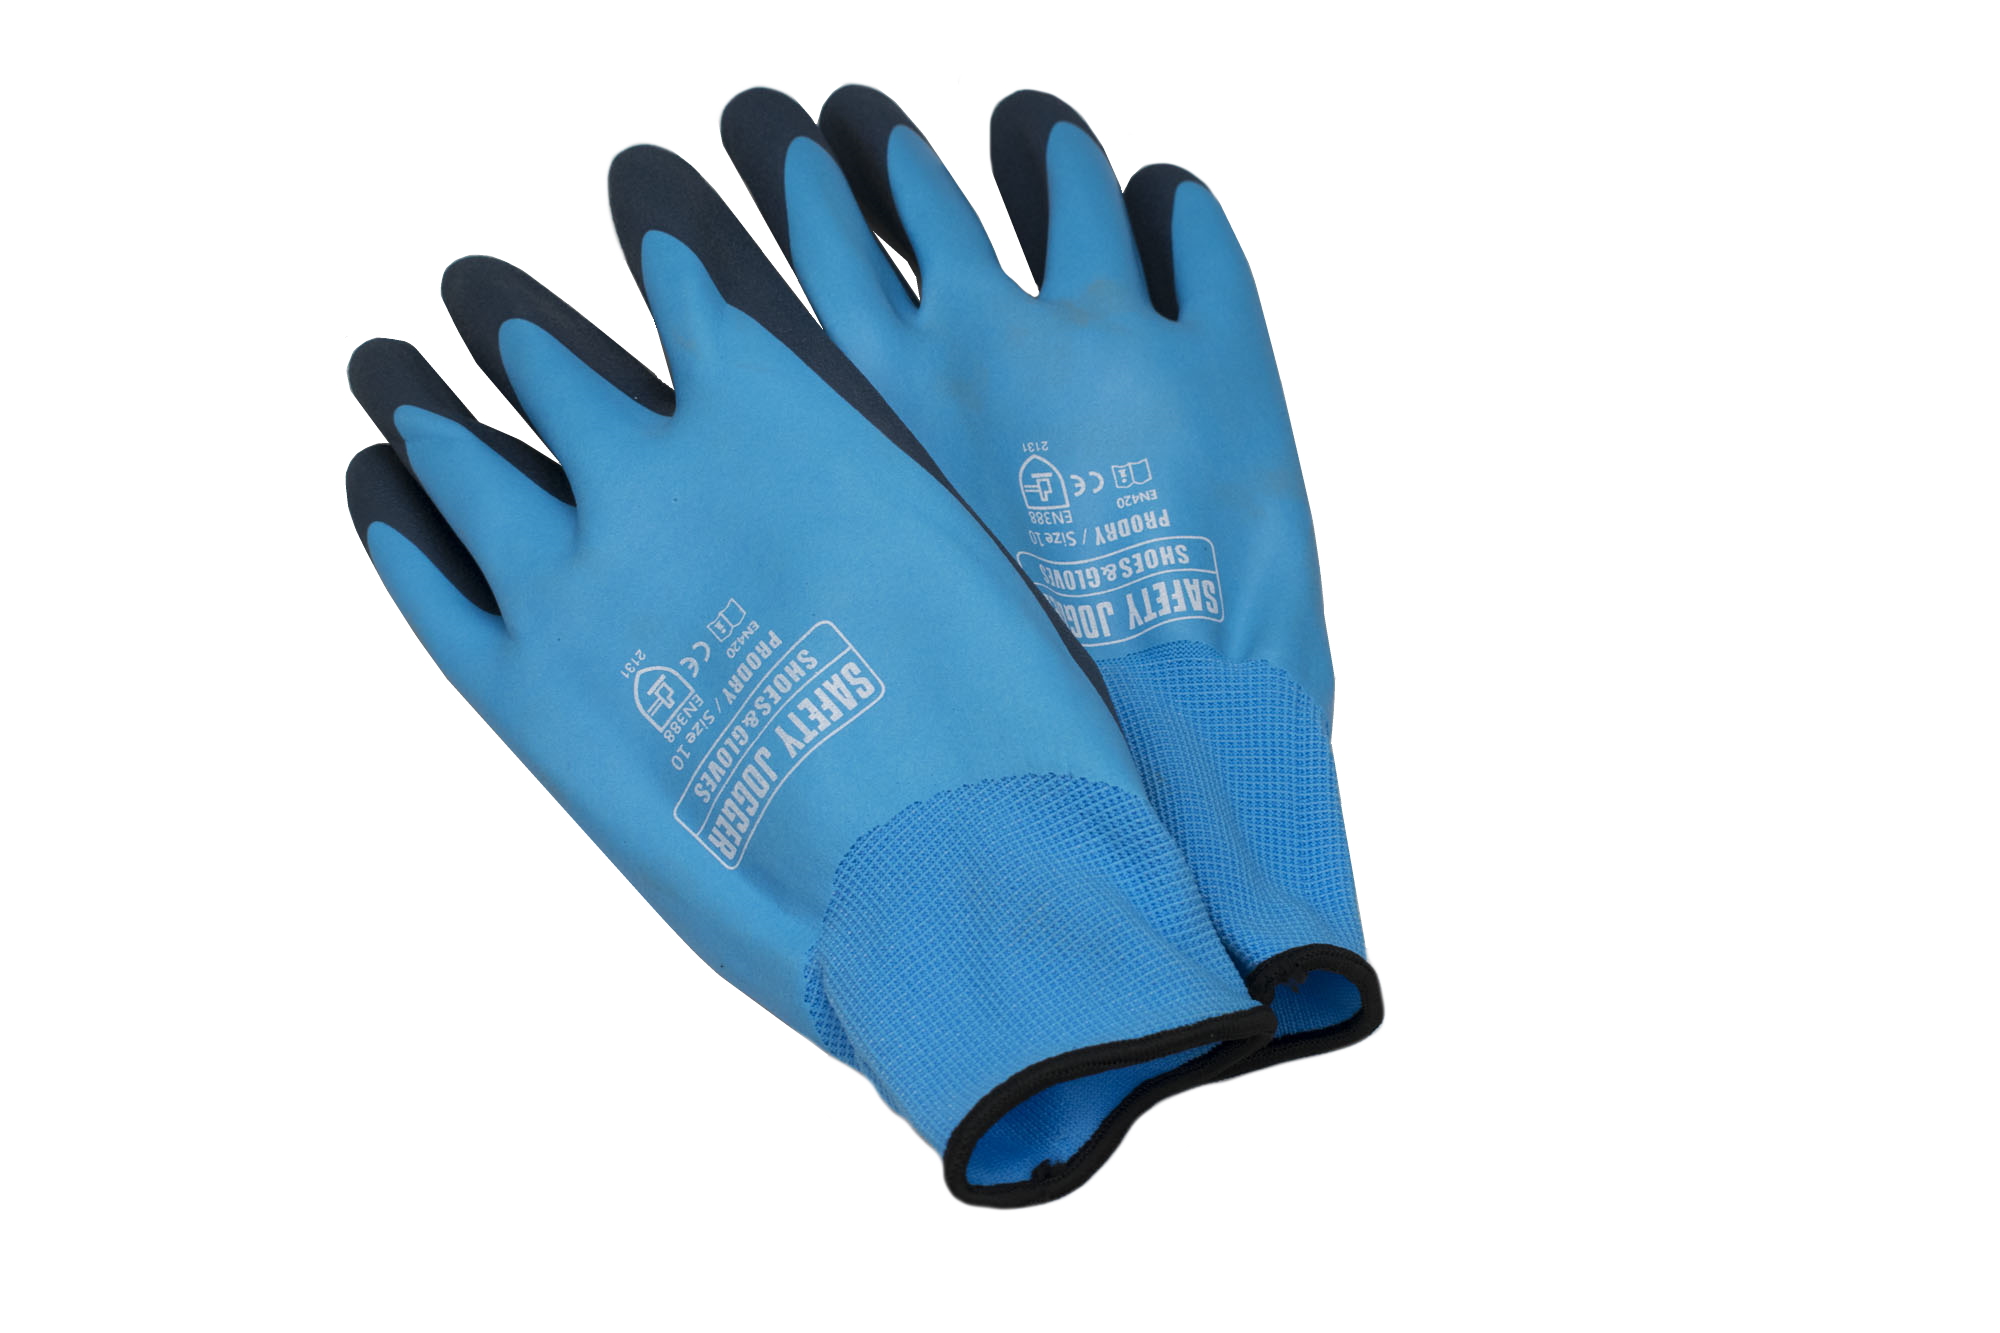 Working glove Safety Jogger prodry waterproof - Agro de Arend